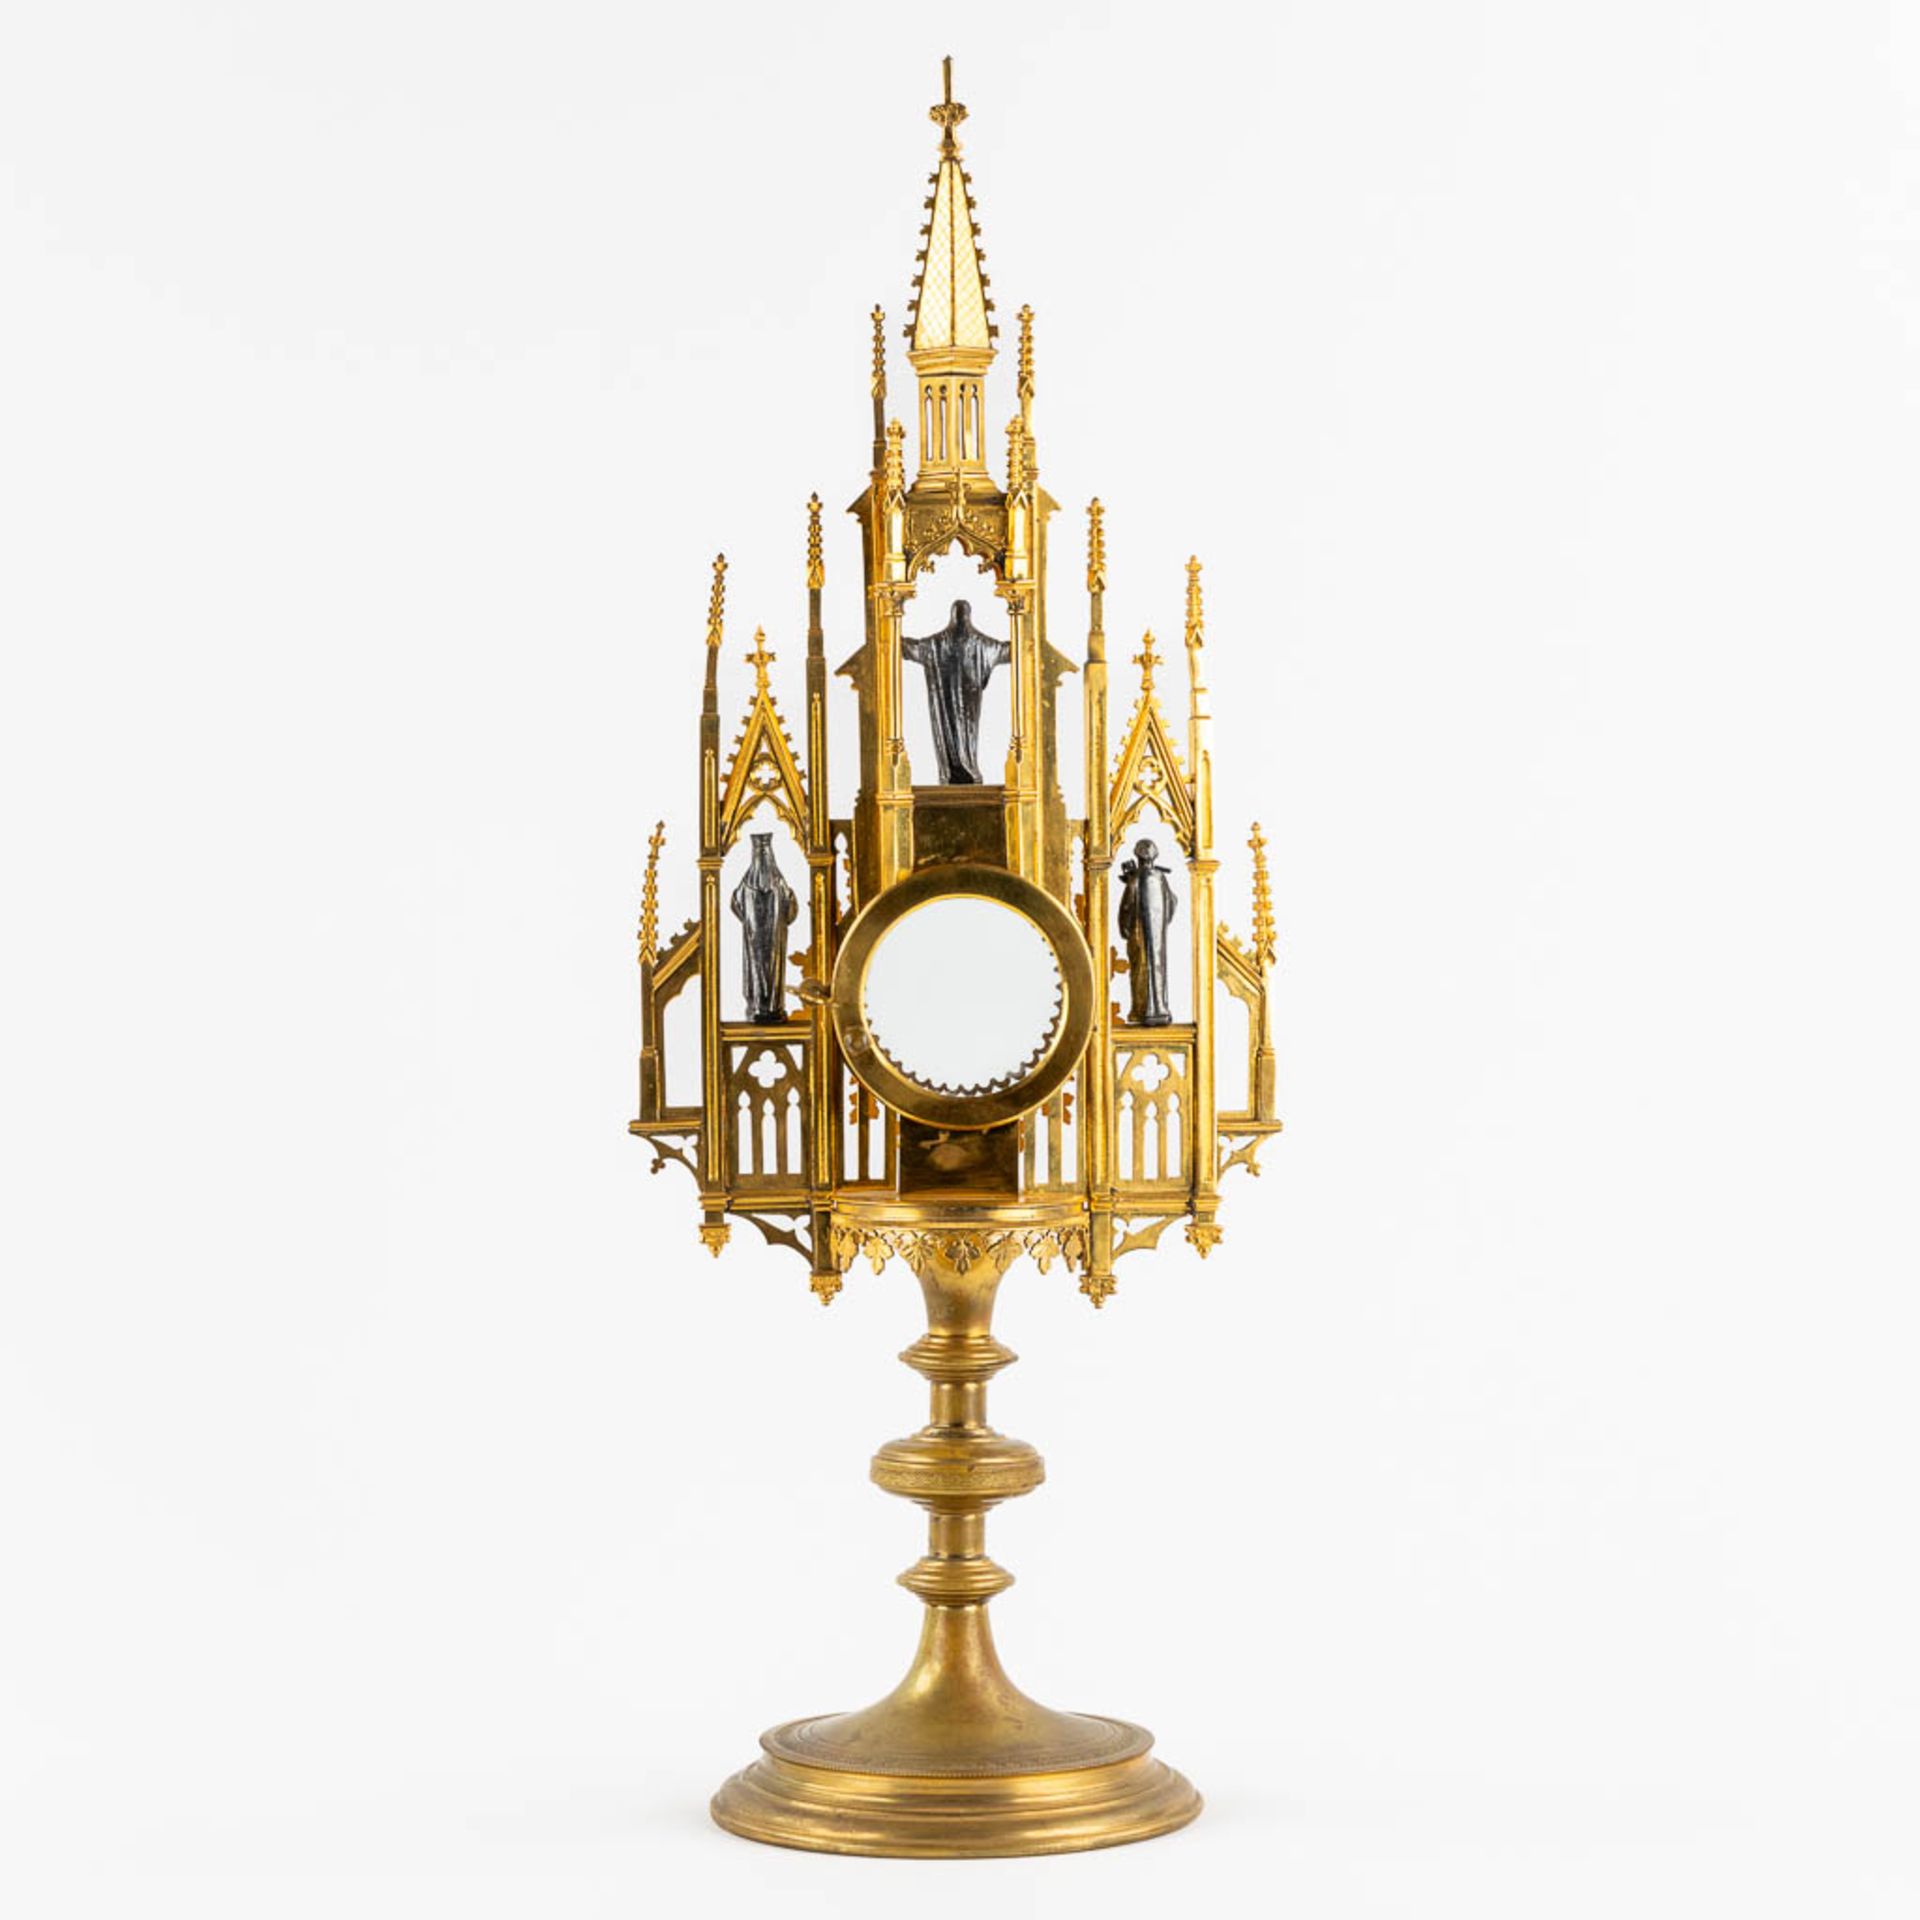 A Tower monstrance, gilt and silver plated brass, Gothic Revival. 19th C. (W:21,5 x H:58 cm) - Bild 11 aus 22